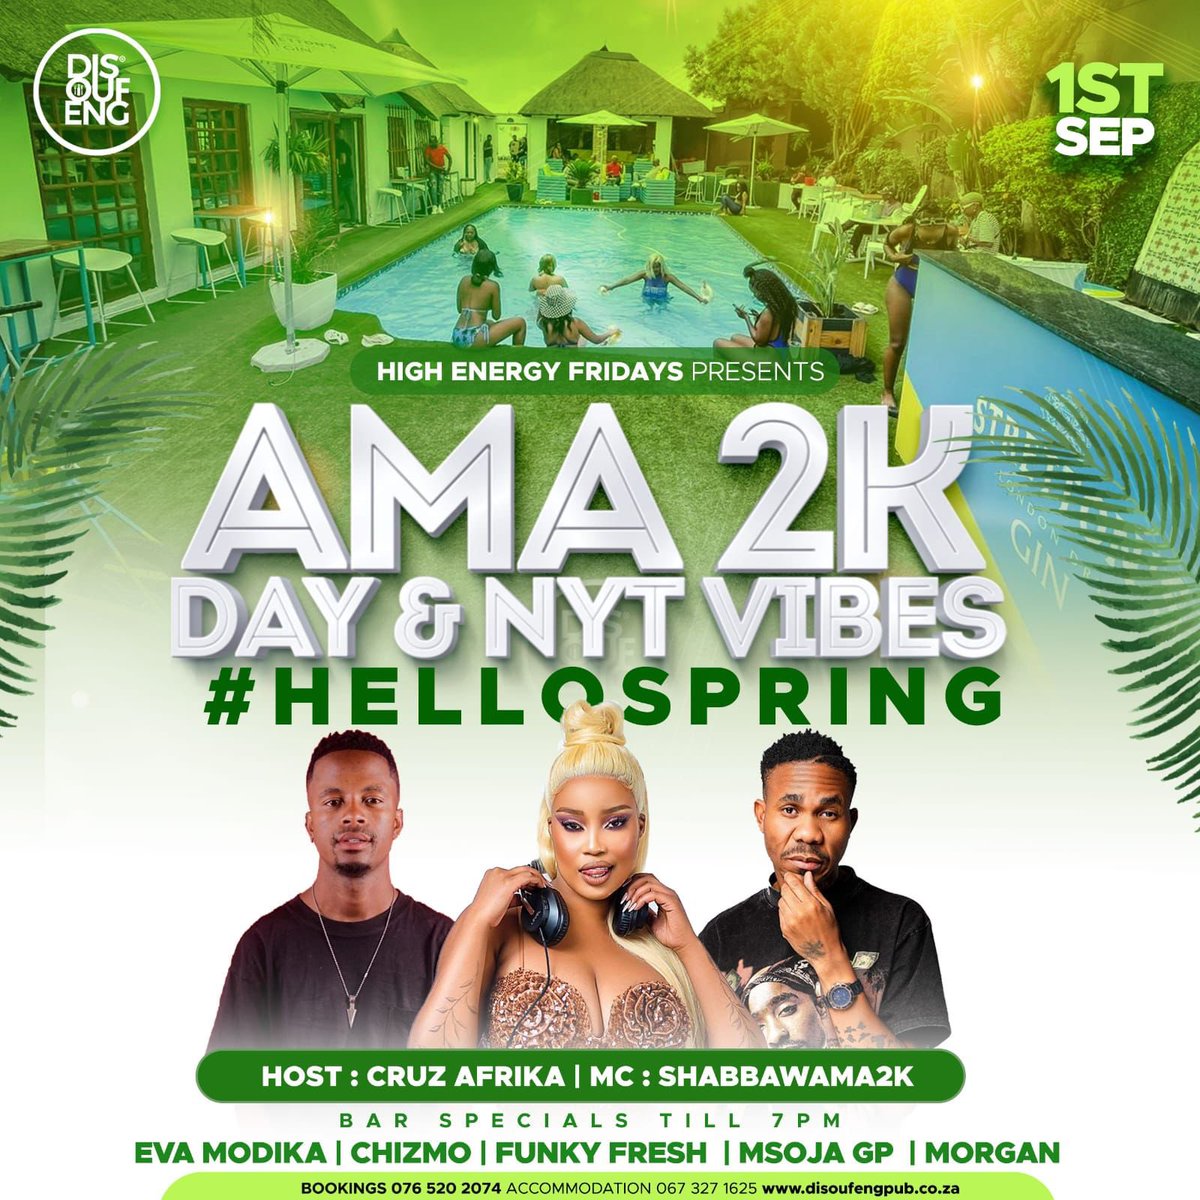 Call 076 520 2074 to book your table at @Disoufeng_Pub in Soweto!

@Iamcruzafrika will be your host for an evening filled with PoolVibes, ClubVibes,  🥳🕺

Eva Modika will be there aswell  #DisoufengAma2KVibes